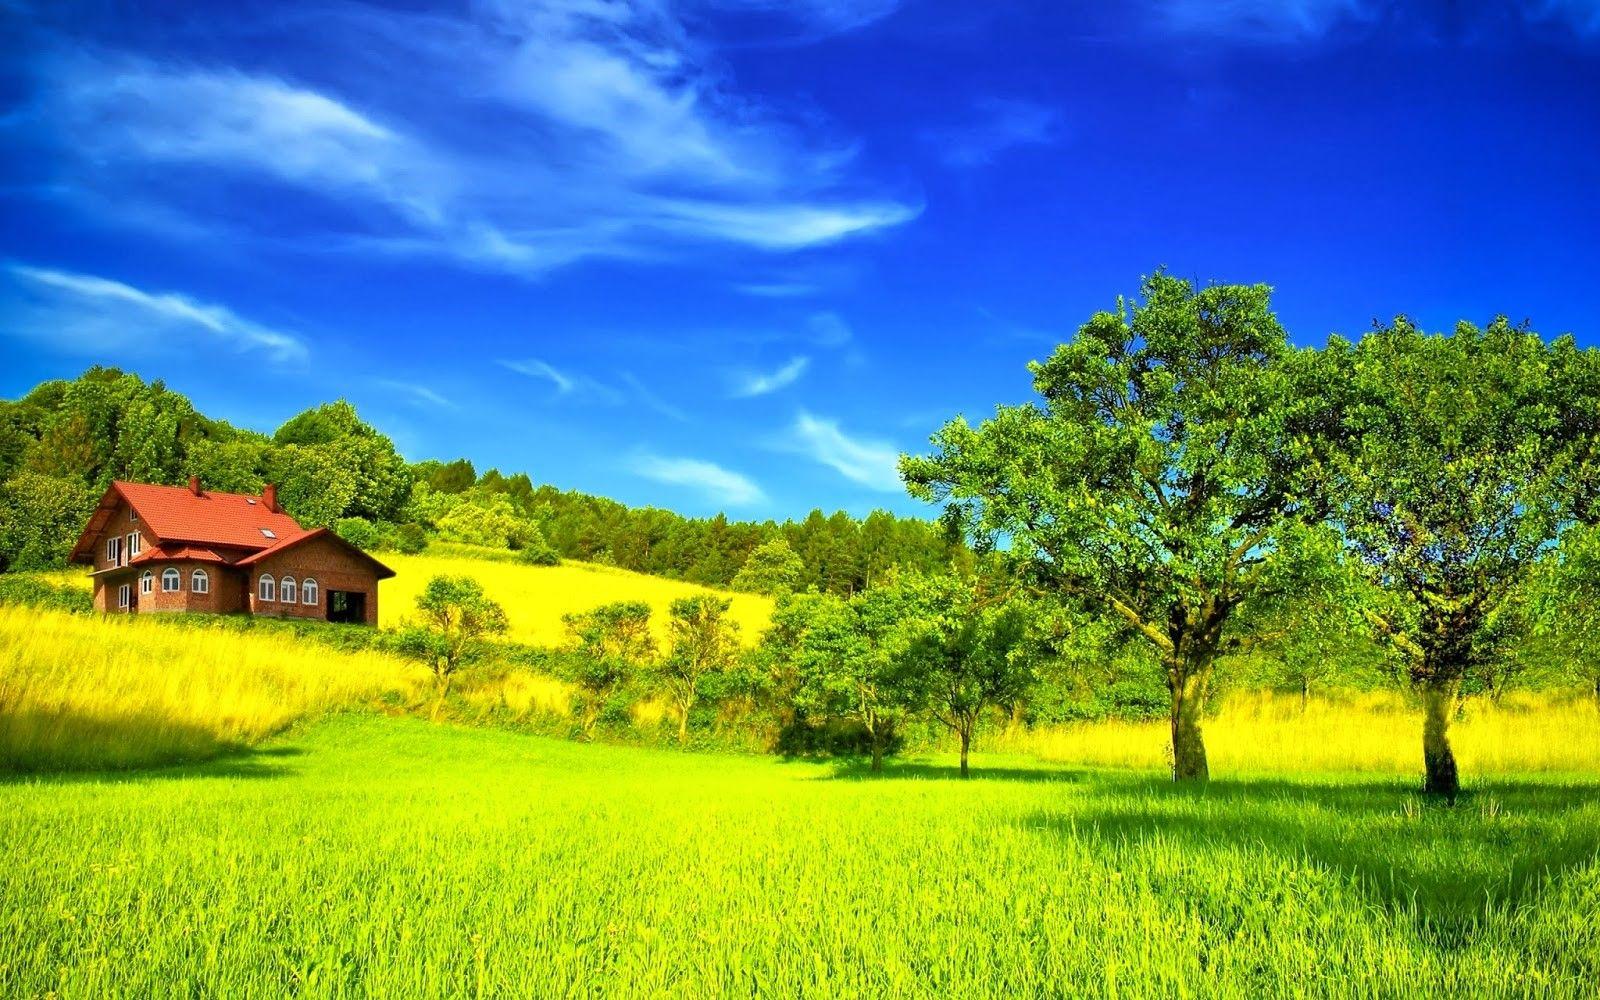 Wallpaper Most Beautiful Green Nature In The World HD On High